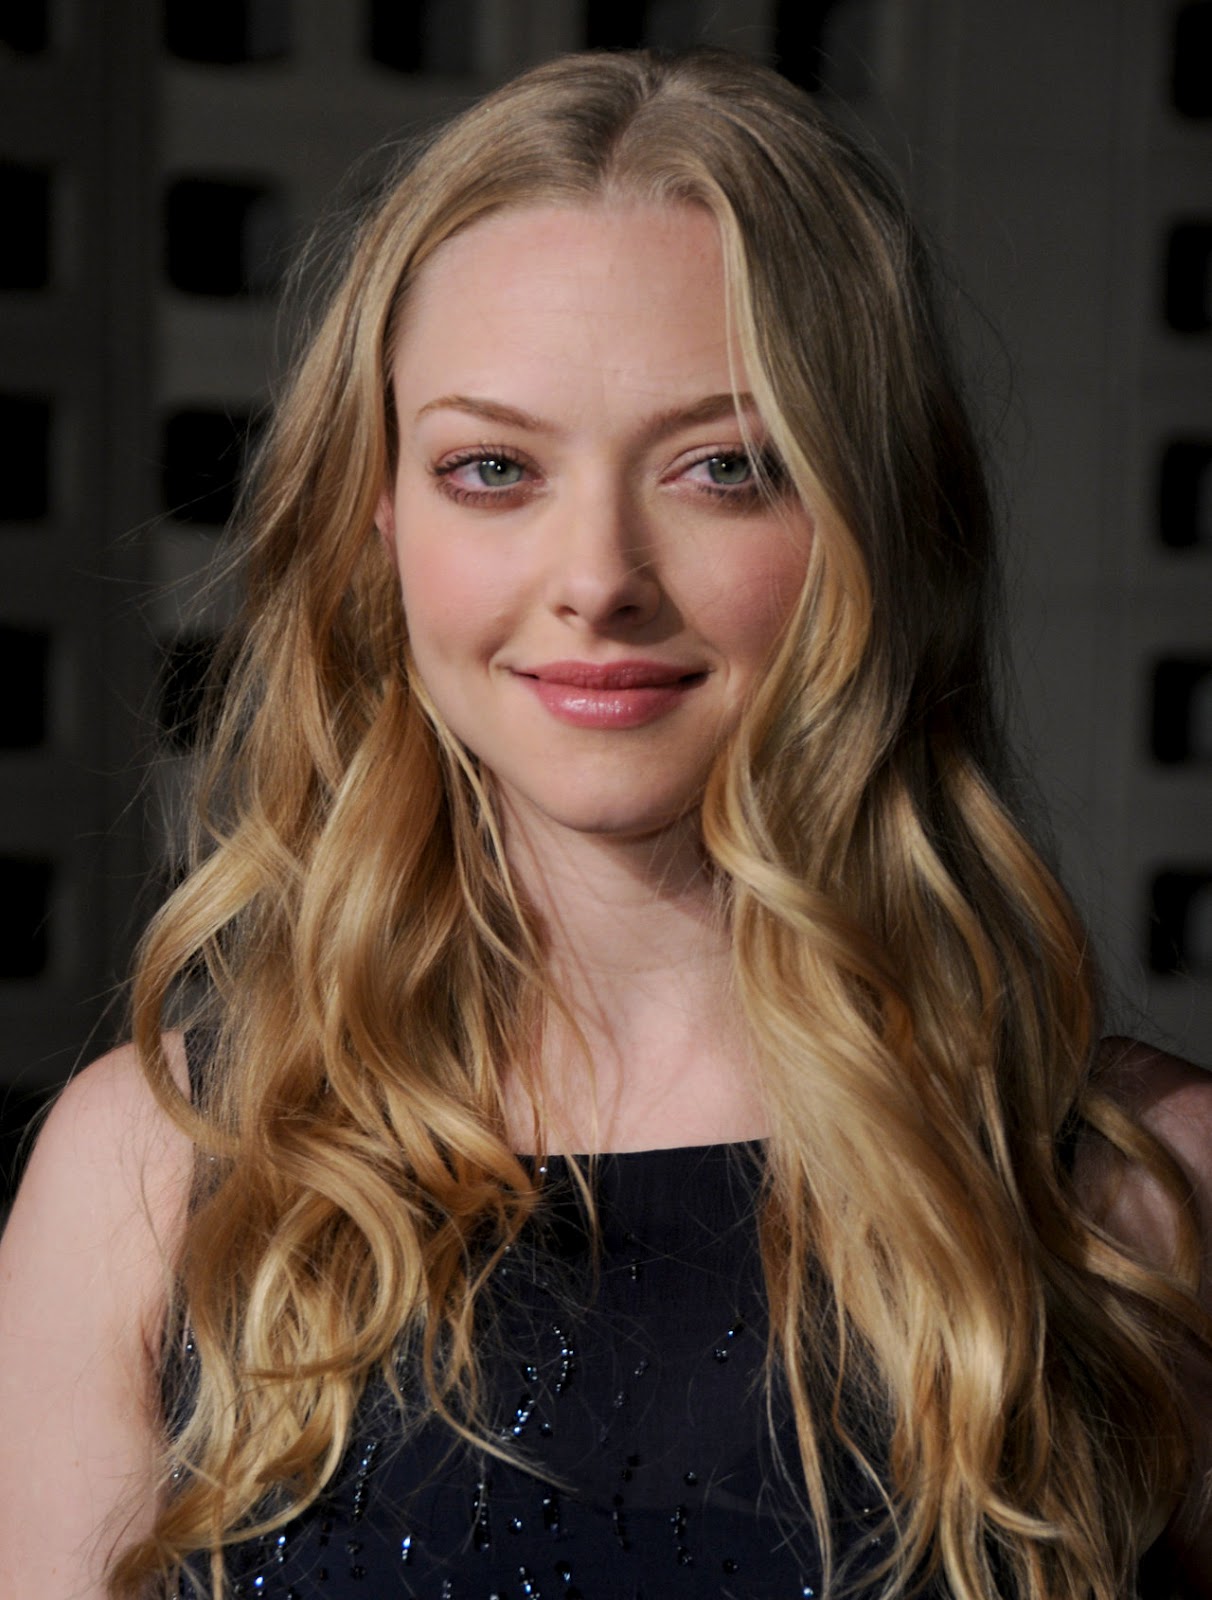 All Top Hollywood Celebrities: Amanda Seyfried Biography and Amanda Seyfried Pictures ...1212 x 1600